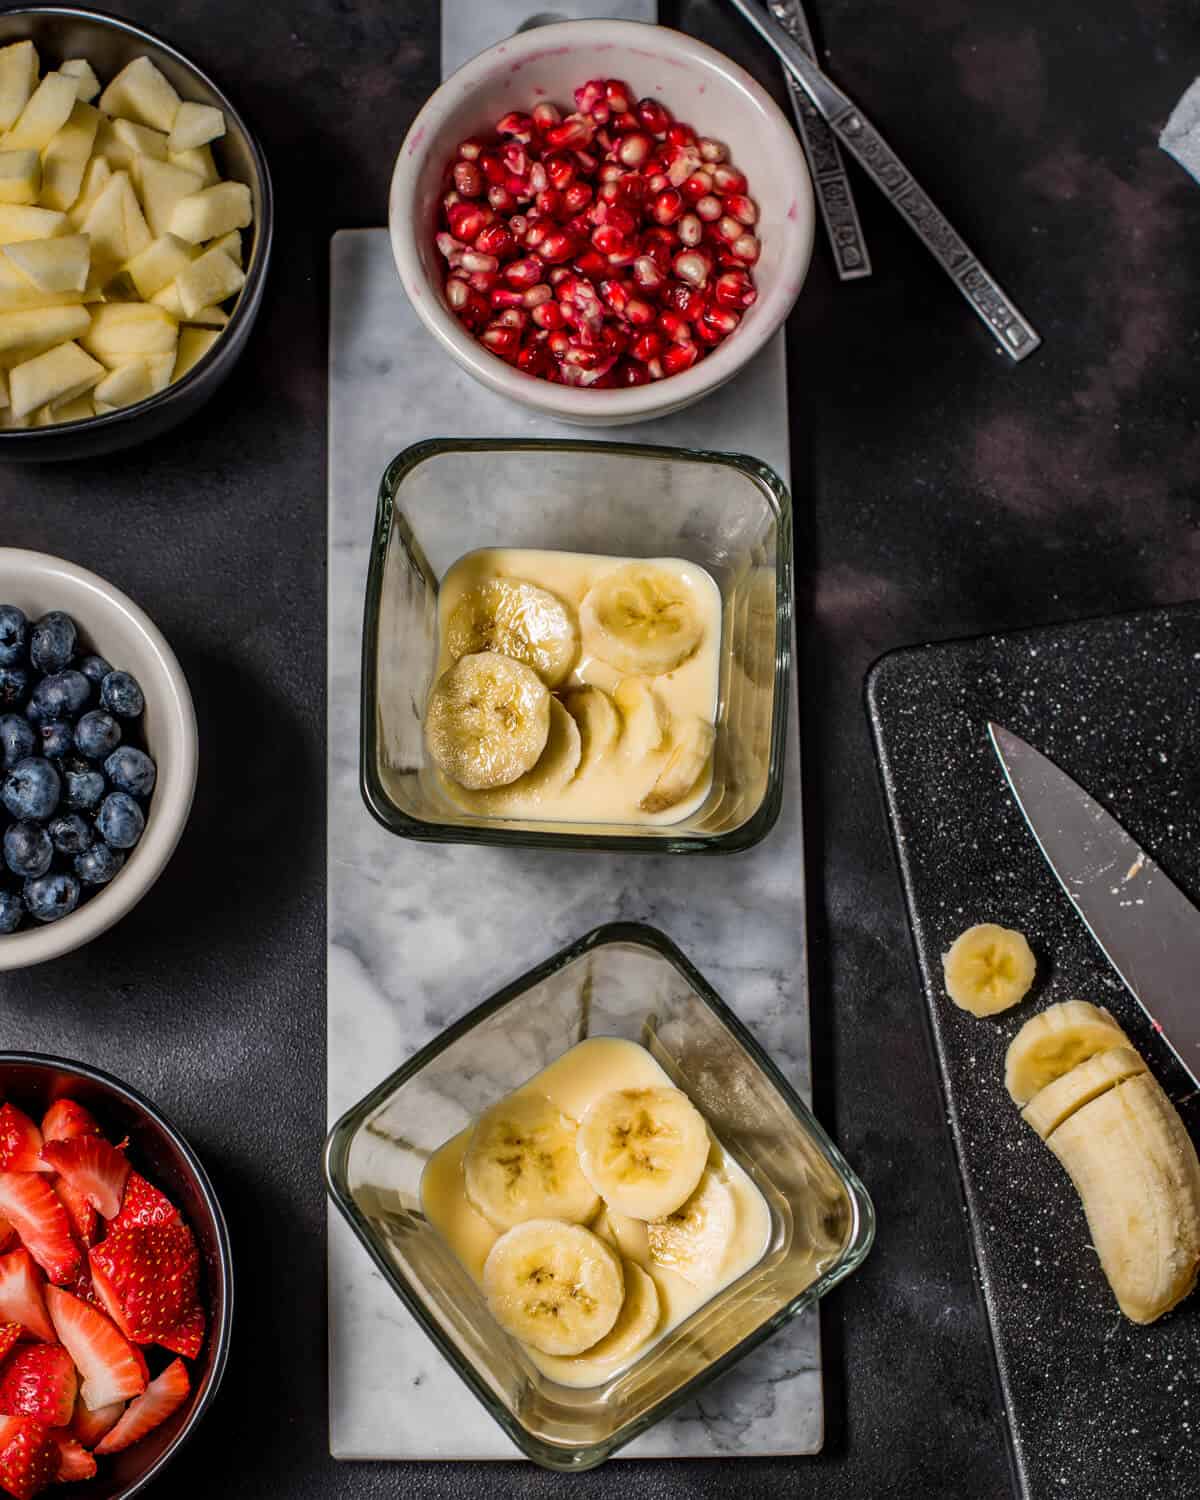 An overshot shot showing bowls of chopped strawberries, banana, blueberries and two bowls with banana served over custard. A chopping board is on the side with a knife and chopped banana.